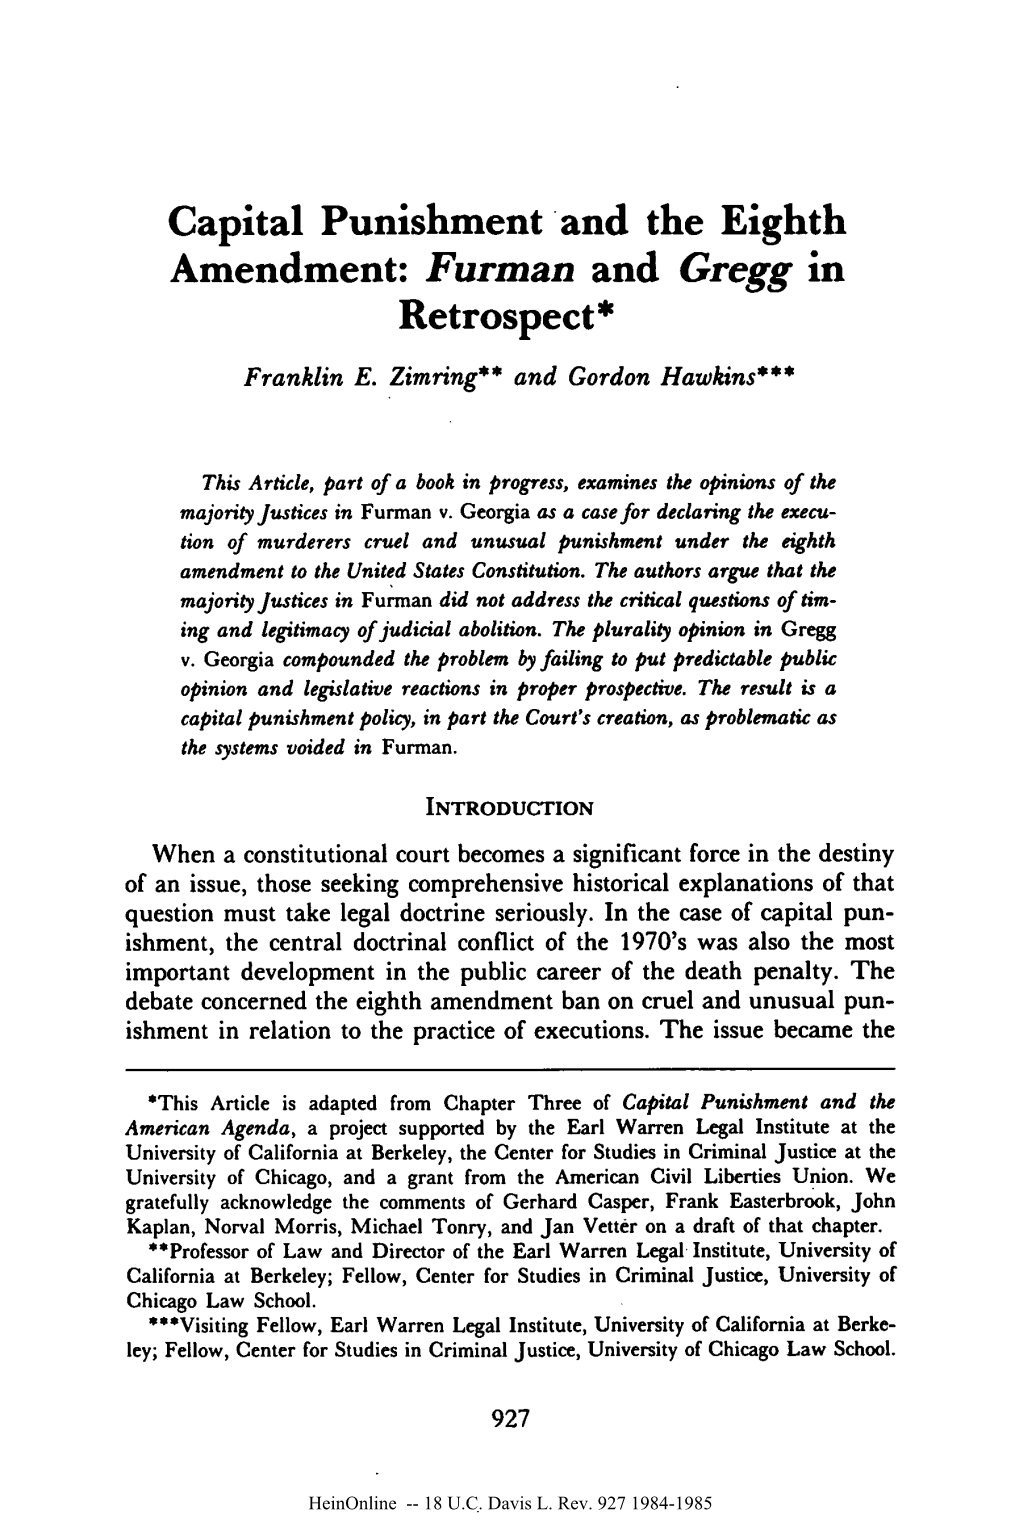 Capital Punishment and the Eighth Amendment: Furman and Gregg in Retrospect*